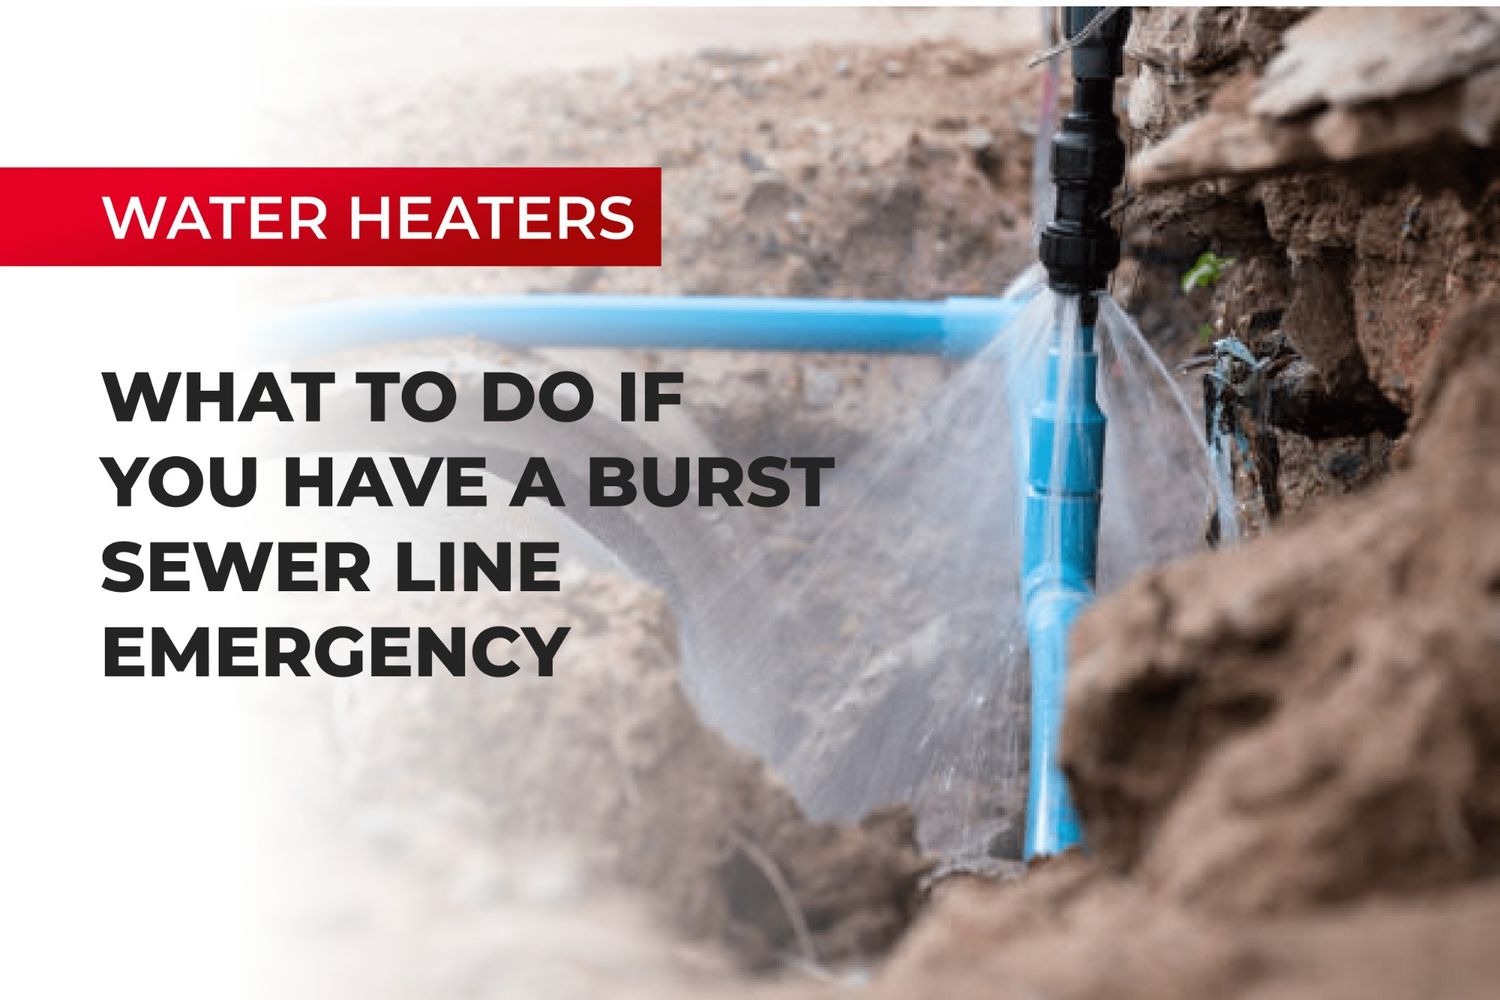 What to Do If You Have a Burst or Leaking Water Heater